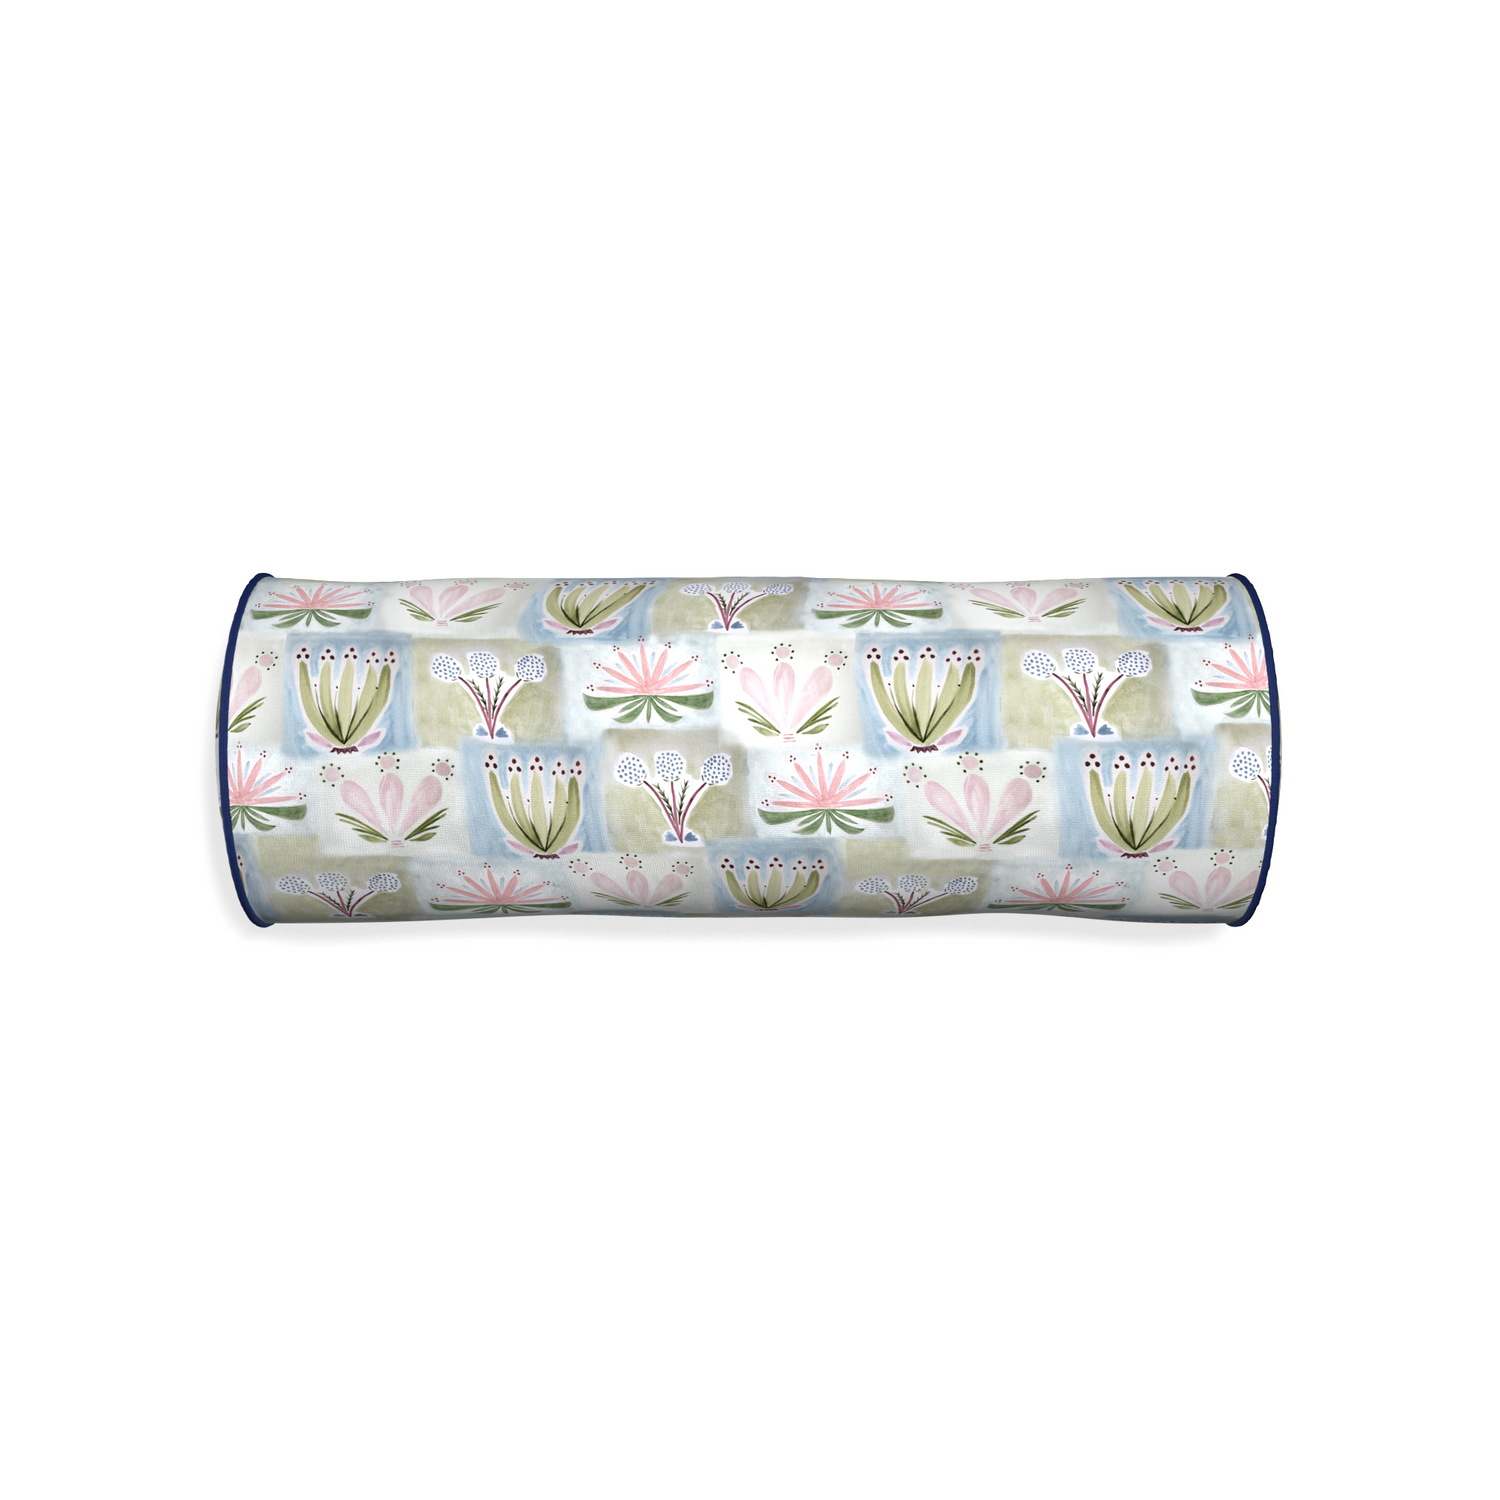 Bolster harper custom hand-painted floralpillow with midnight piping on white background